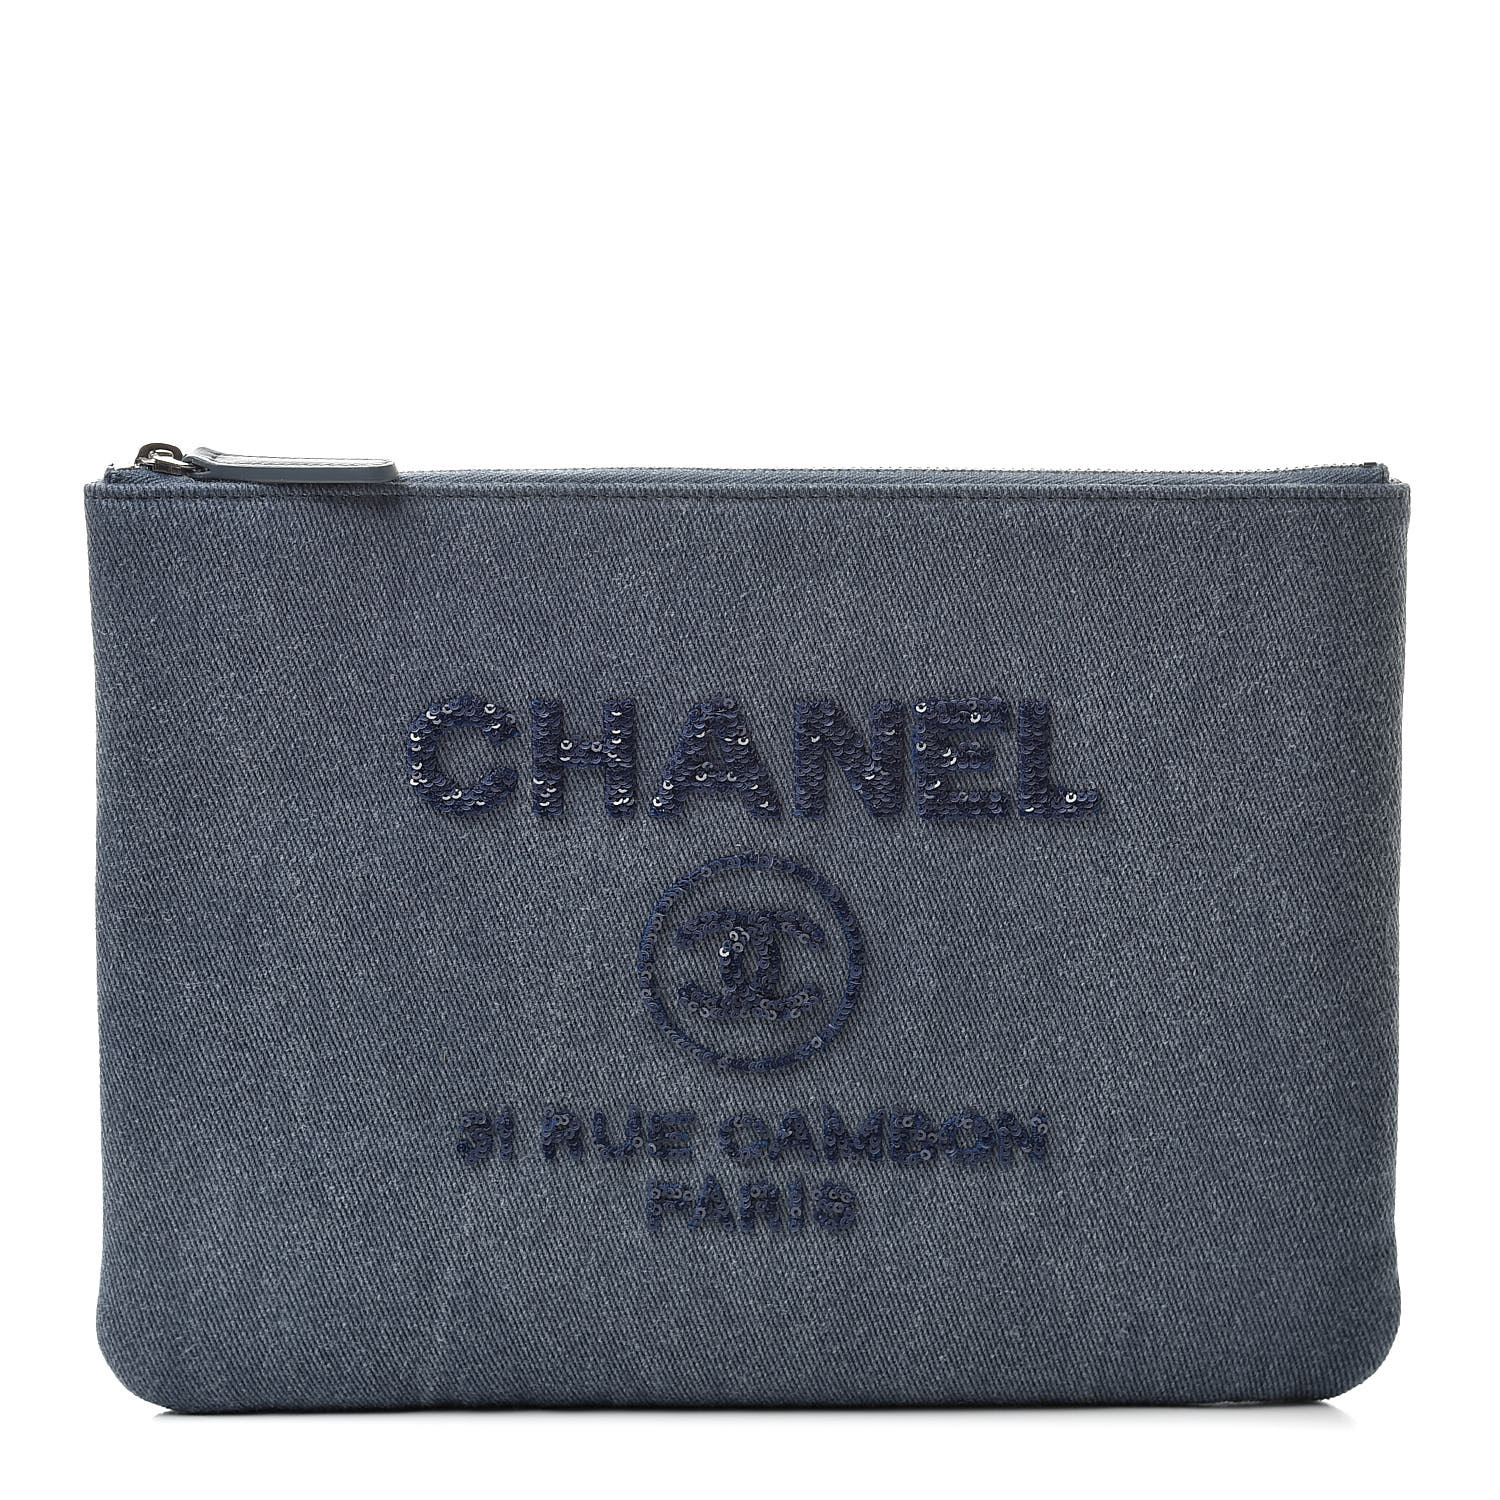 CHANEL Canvas Sequins Medium Deauville Cosmetic Pouch Navy 523368